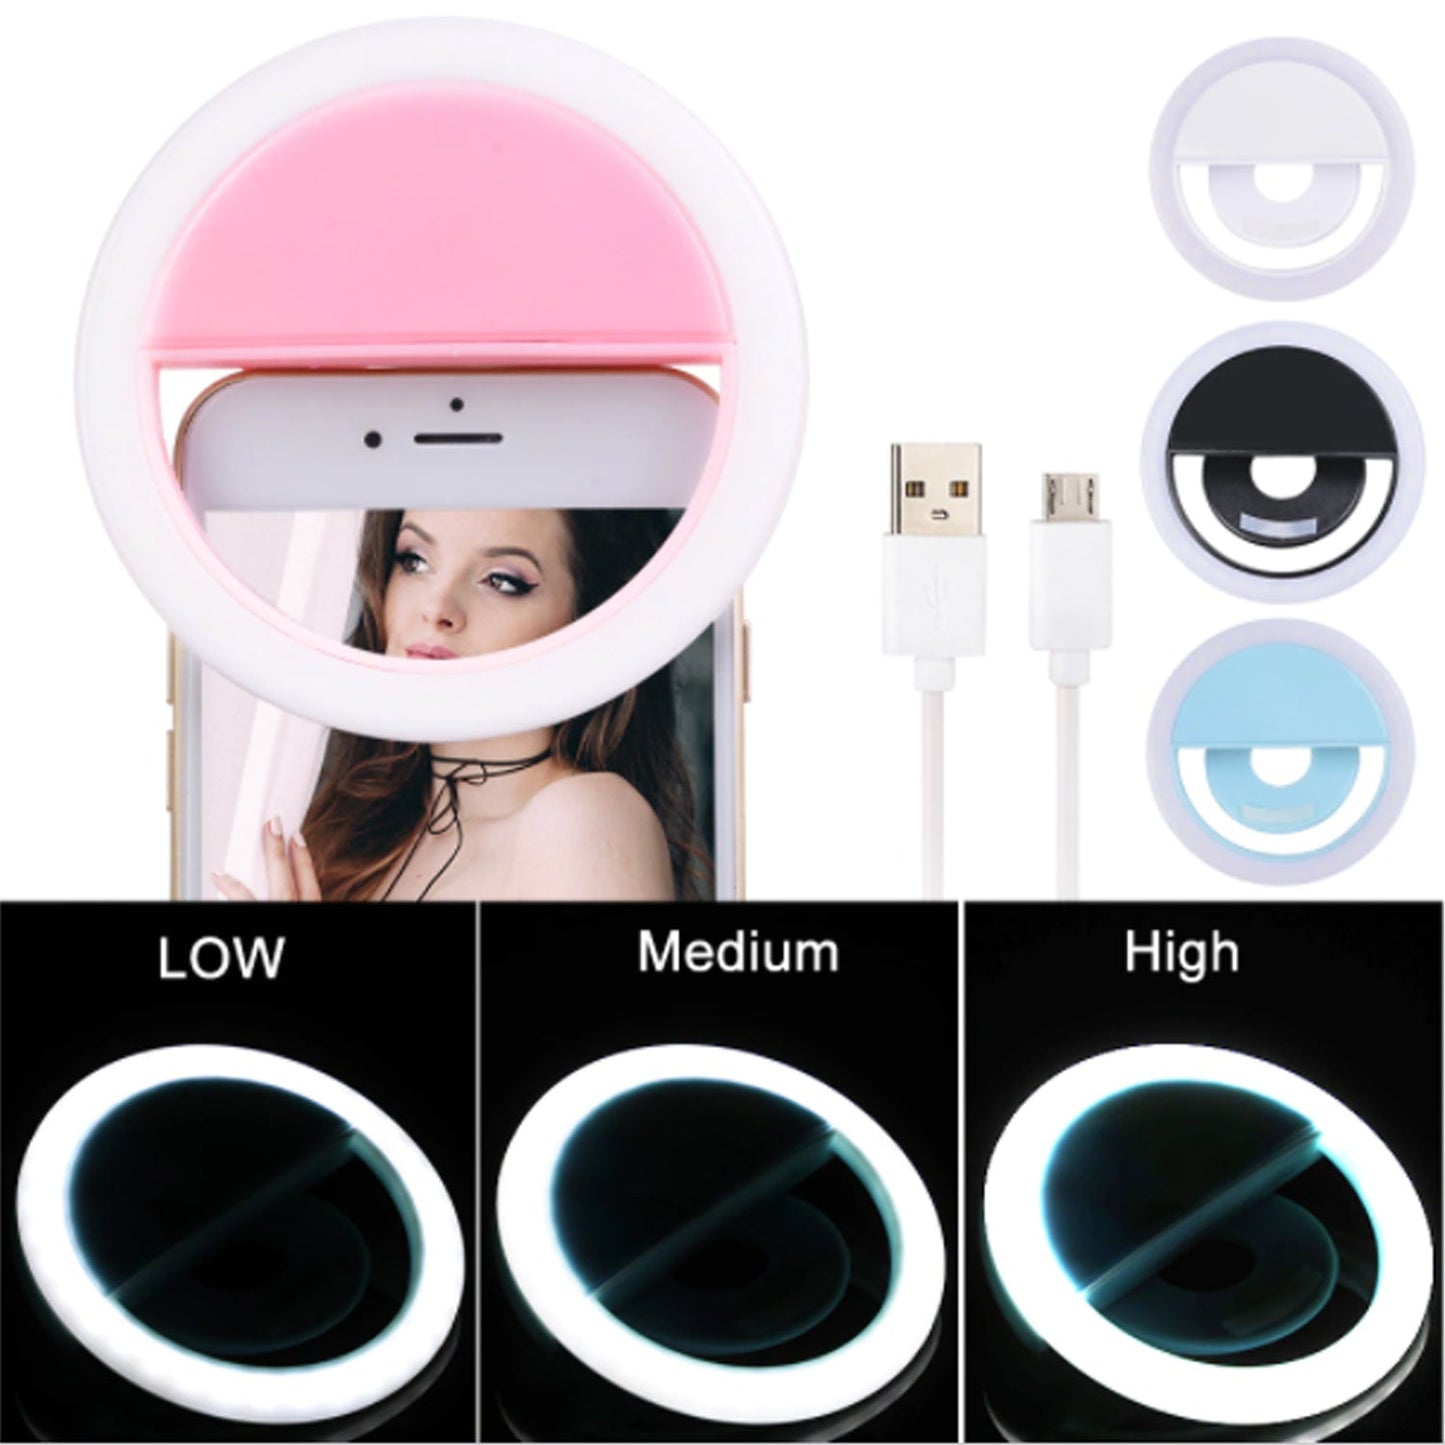 4785 Selfie Ring Light used for applying bright shade over face during taking selfies and making videos etc. DeoDap